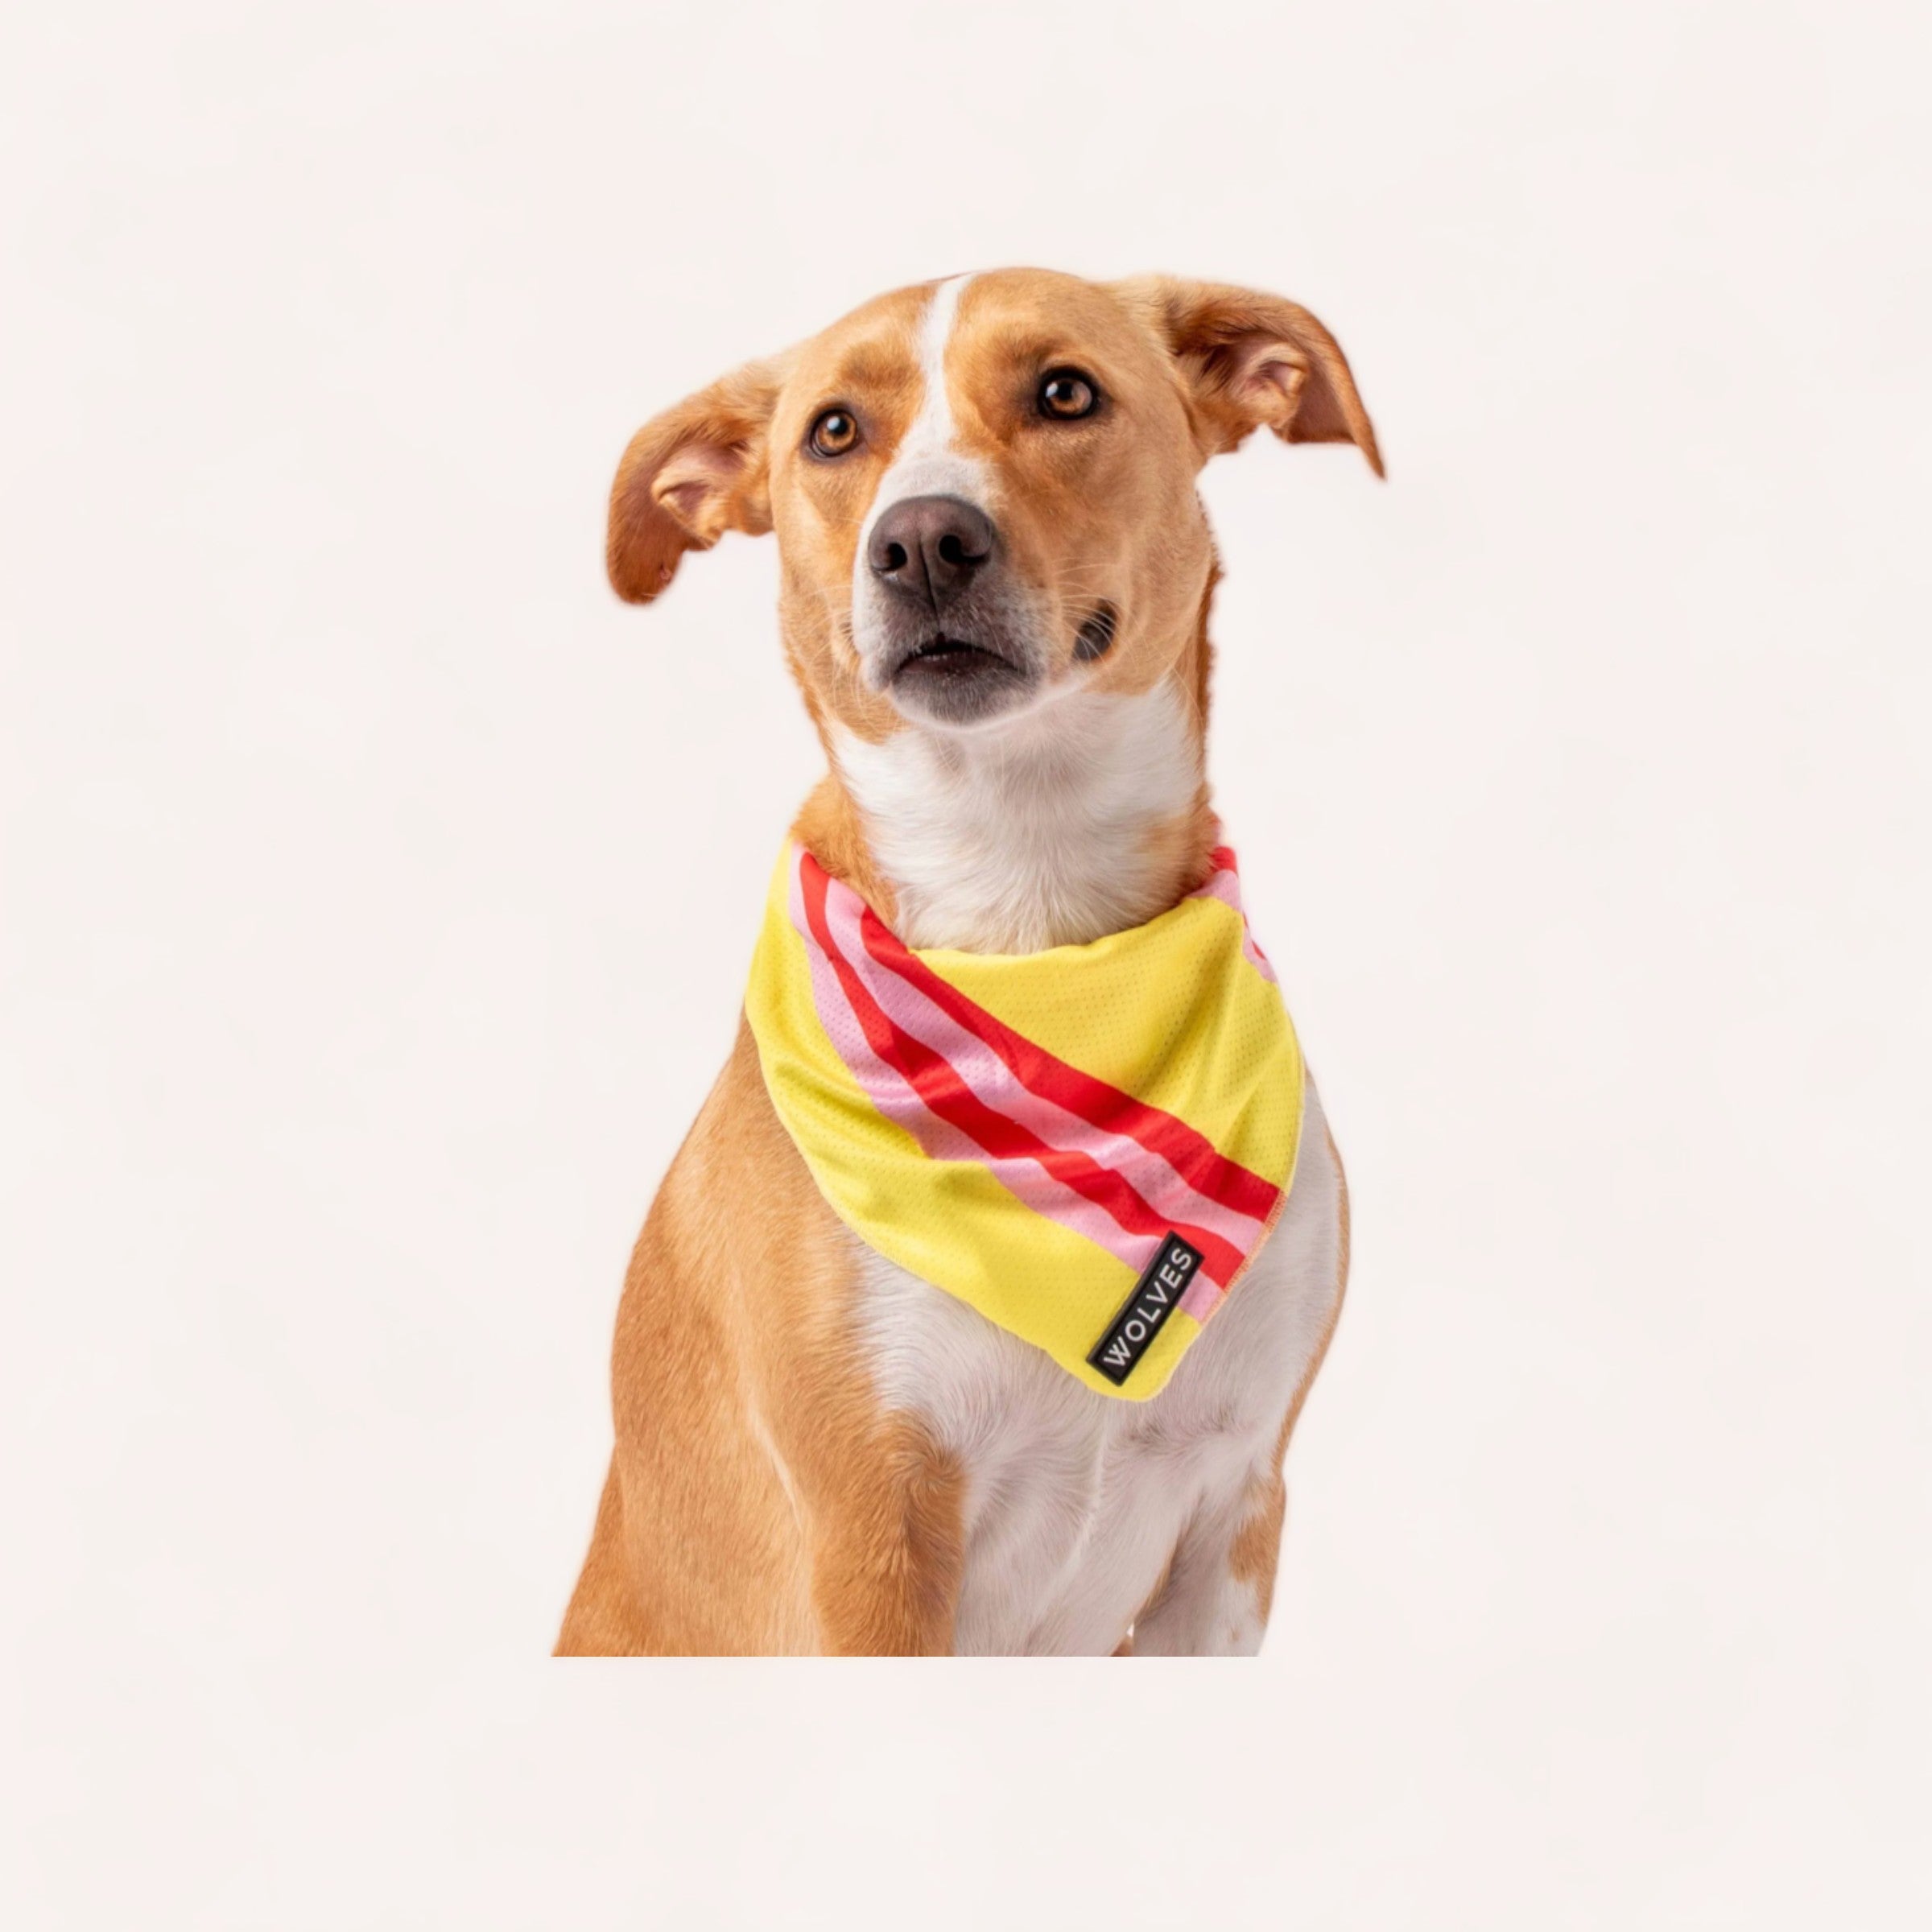 A curious tan and white dog wearing a stylish yellow and red striped, wrinkle-free Penny Bandana by Wolves of Wellington looks slightly to the side with a gentle head tilt.